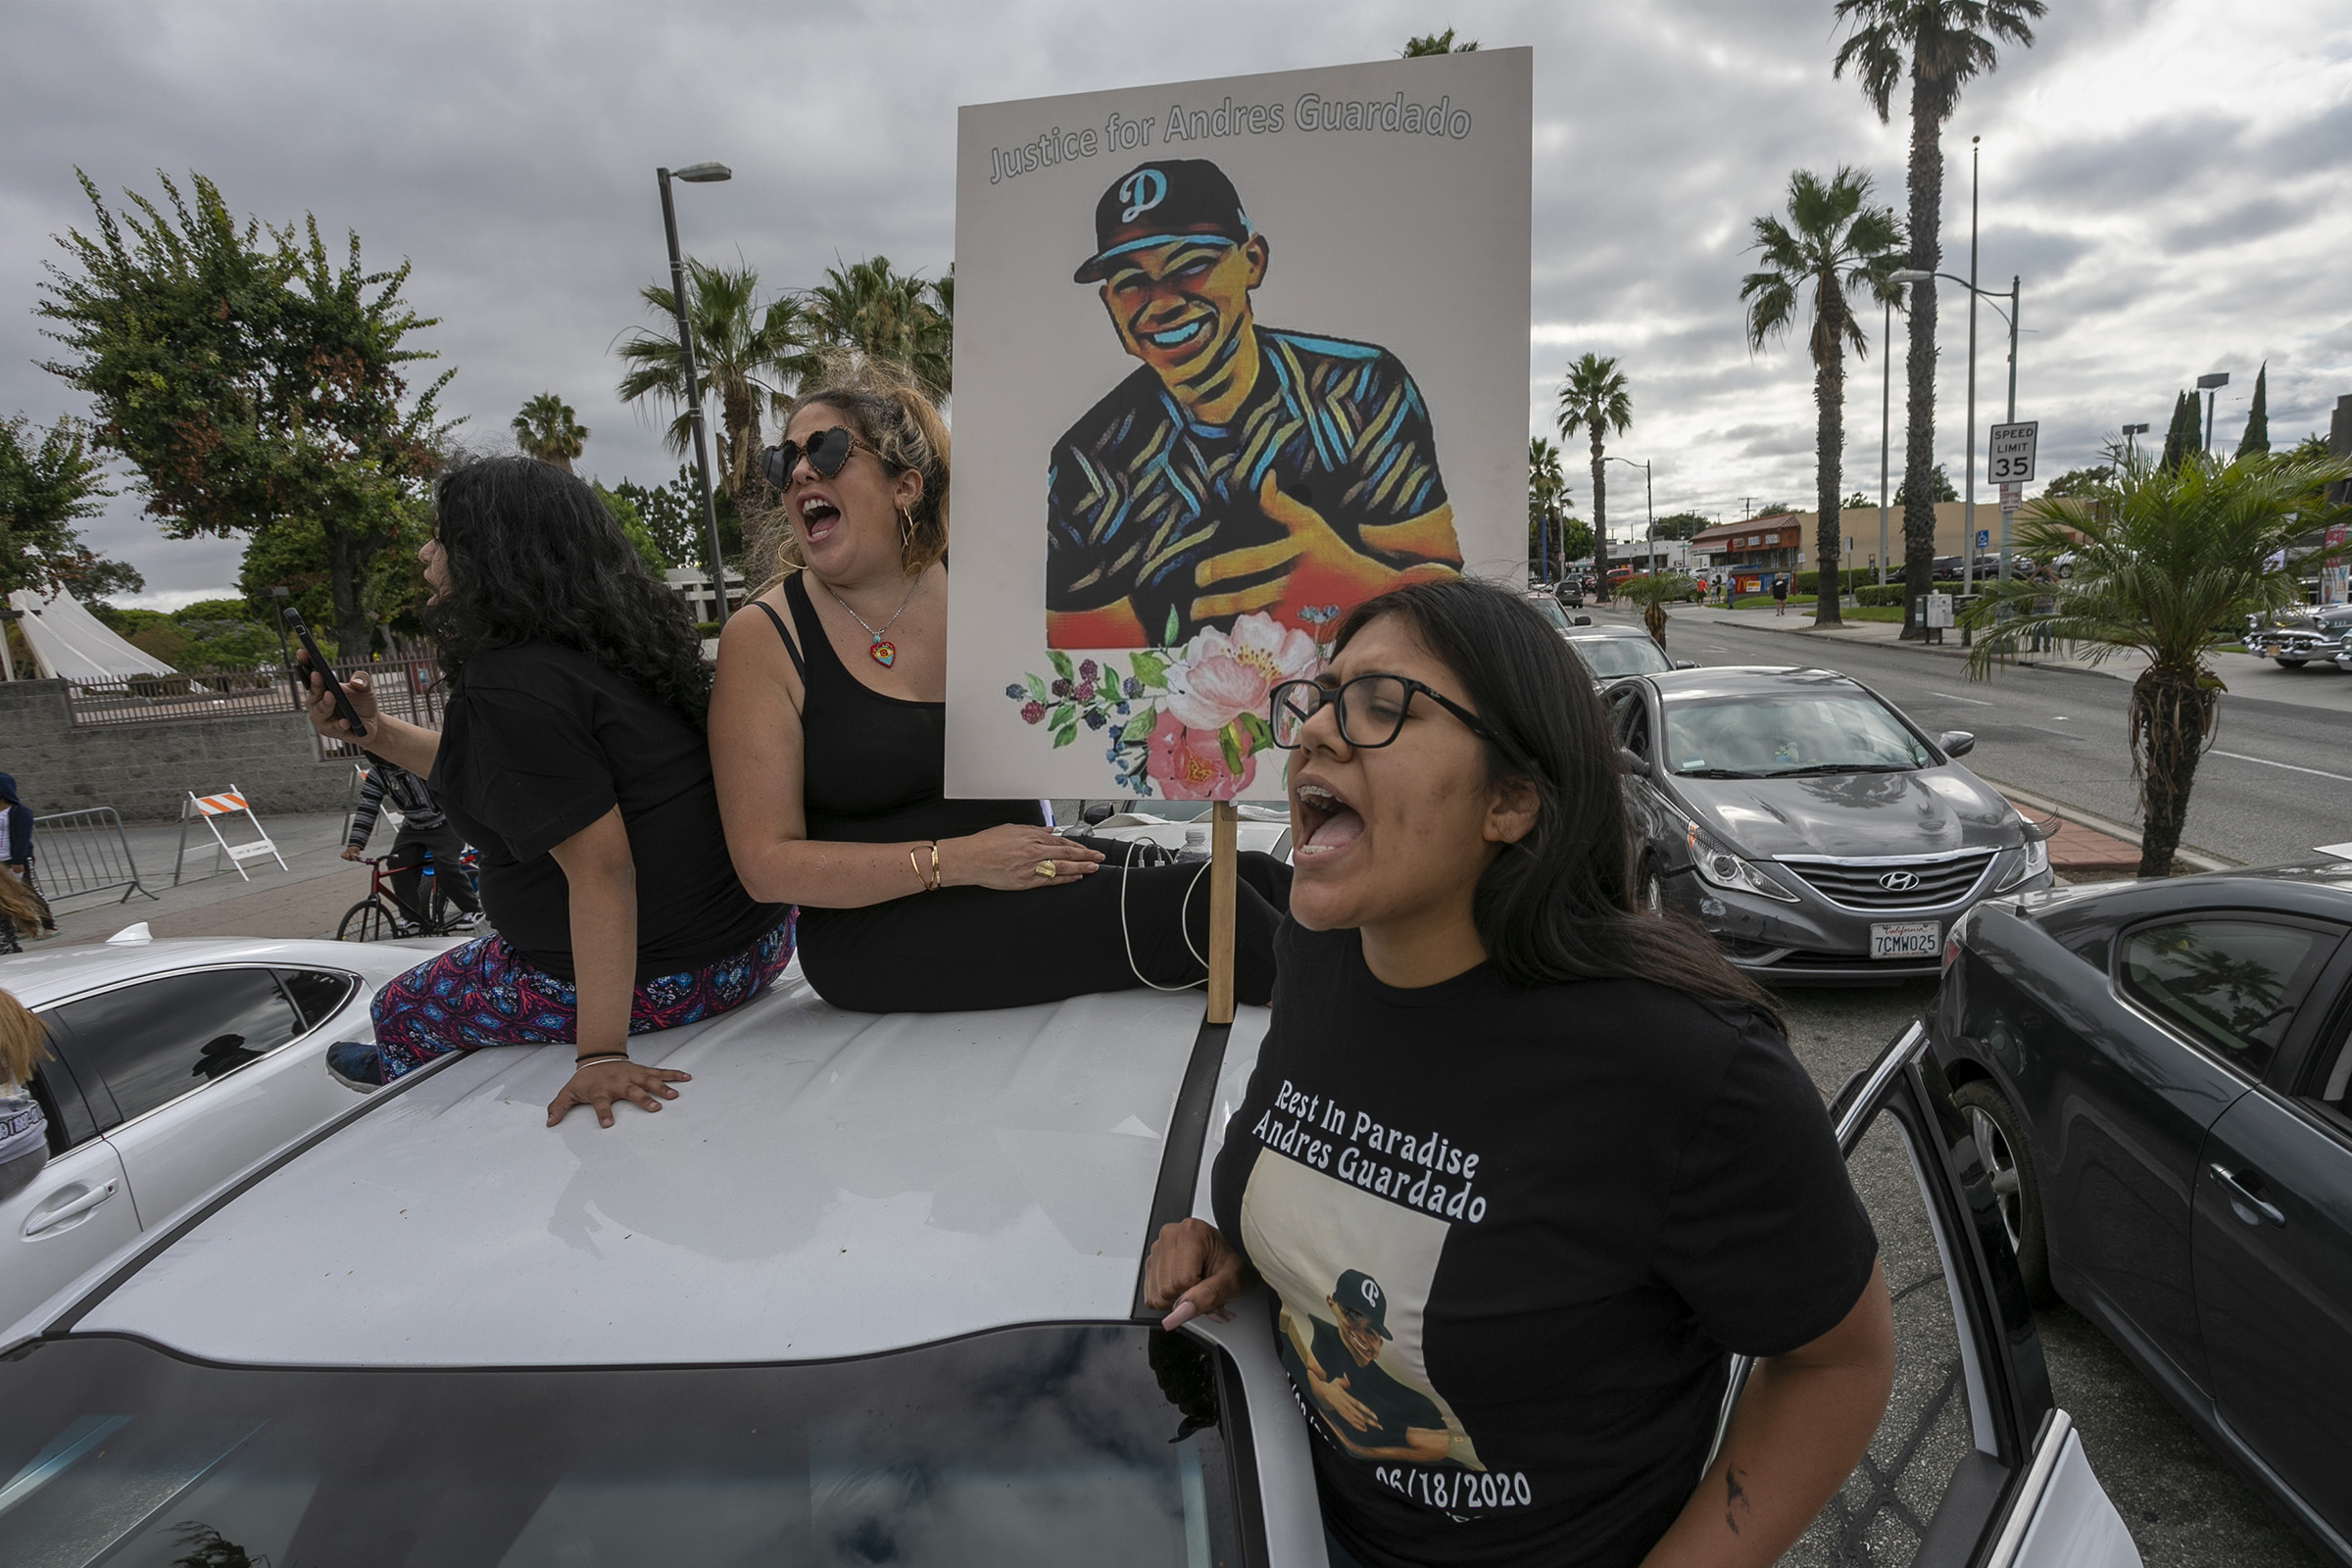 A woman holds a placard as activists and relatives of Andres Guardado, who was shot and killed by a sheriff's deputy in Gardena, rally to call on the city to rescind its policing contract, in Compton, California, on June 28, 2020. (David McNew—AFP via Getty Images)